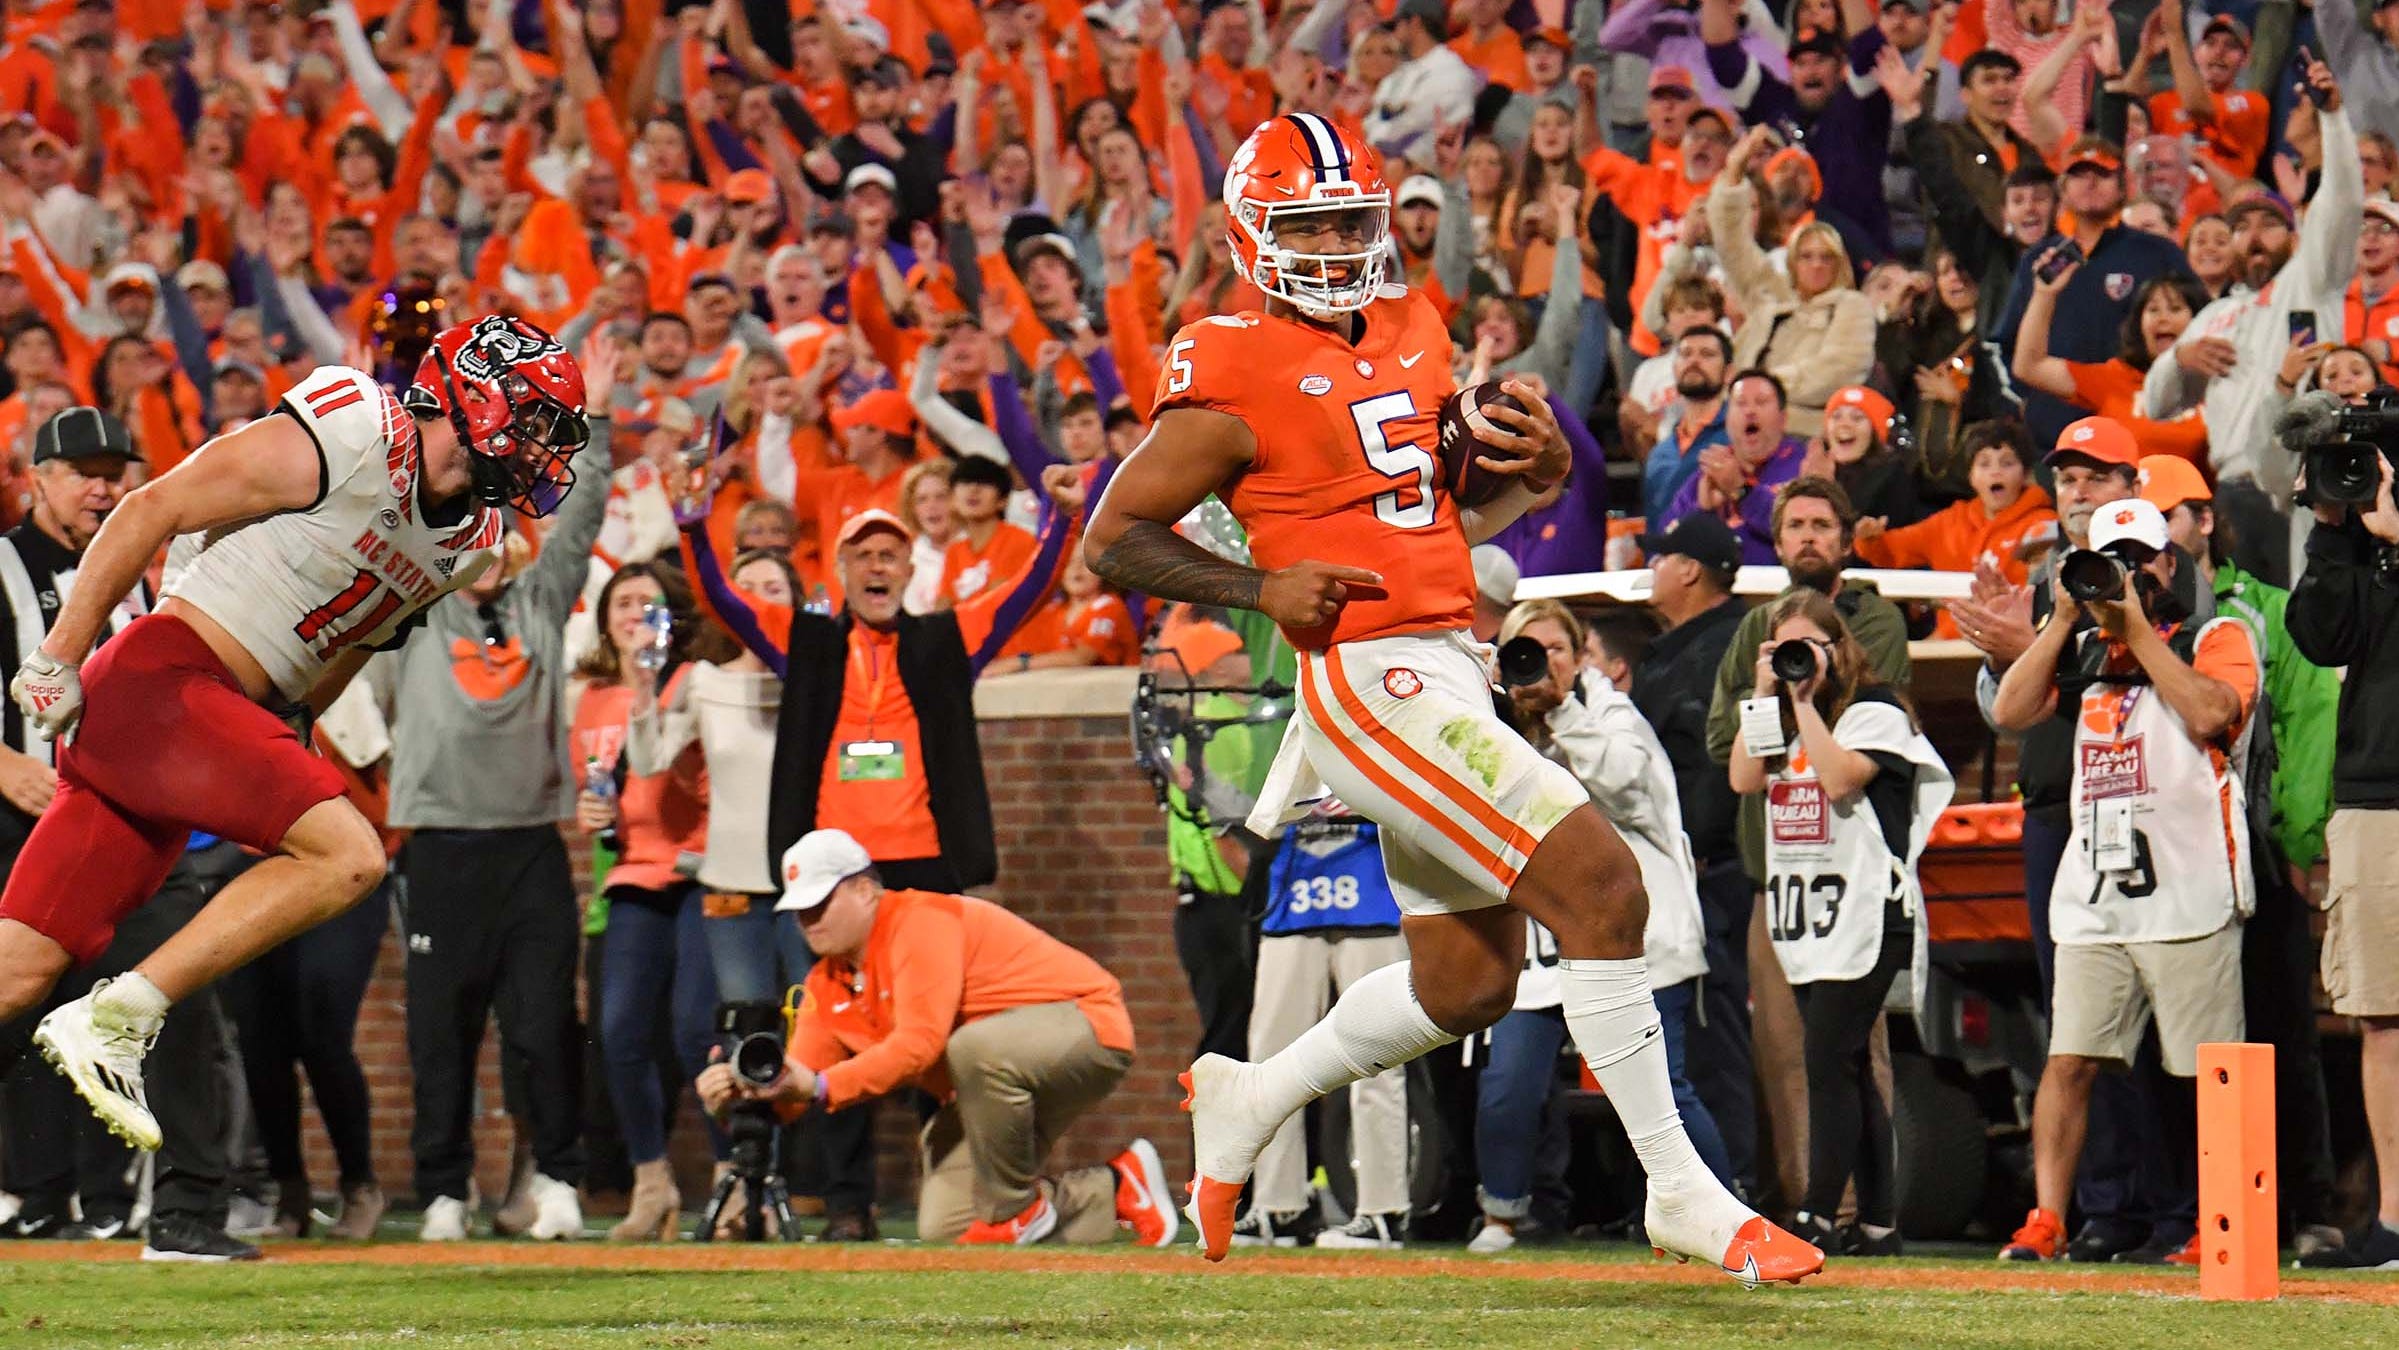 Clemson football's D.J. Uiagalelei adds signature to win vs. NC State